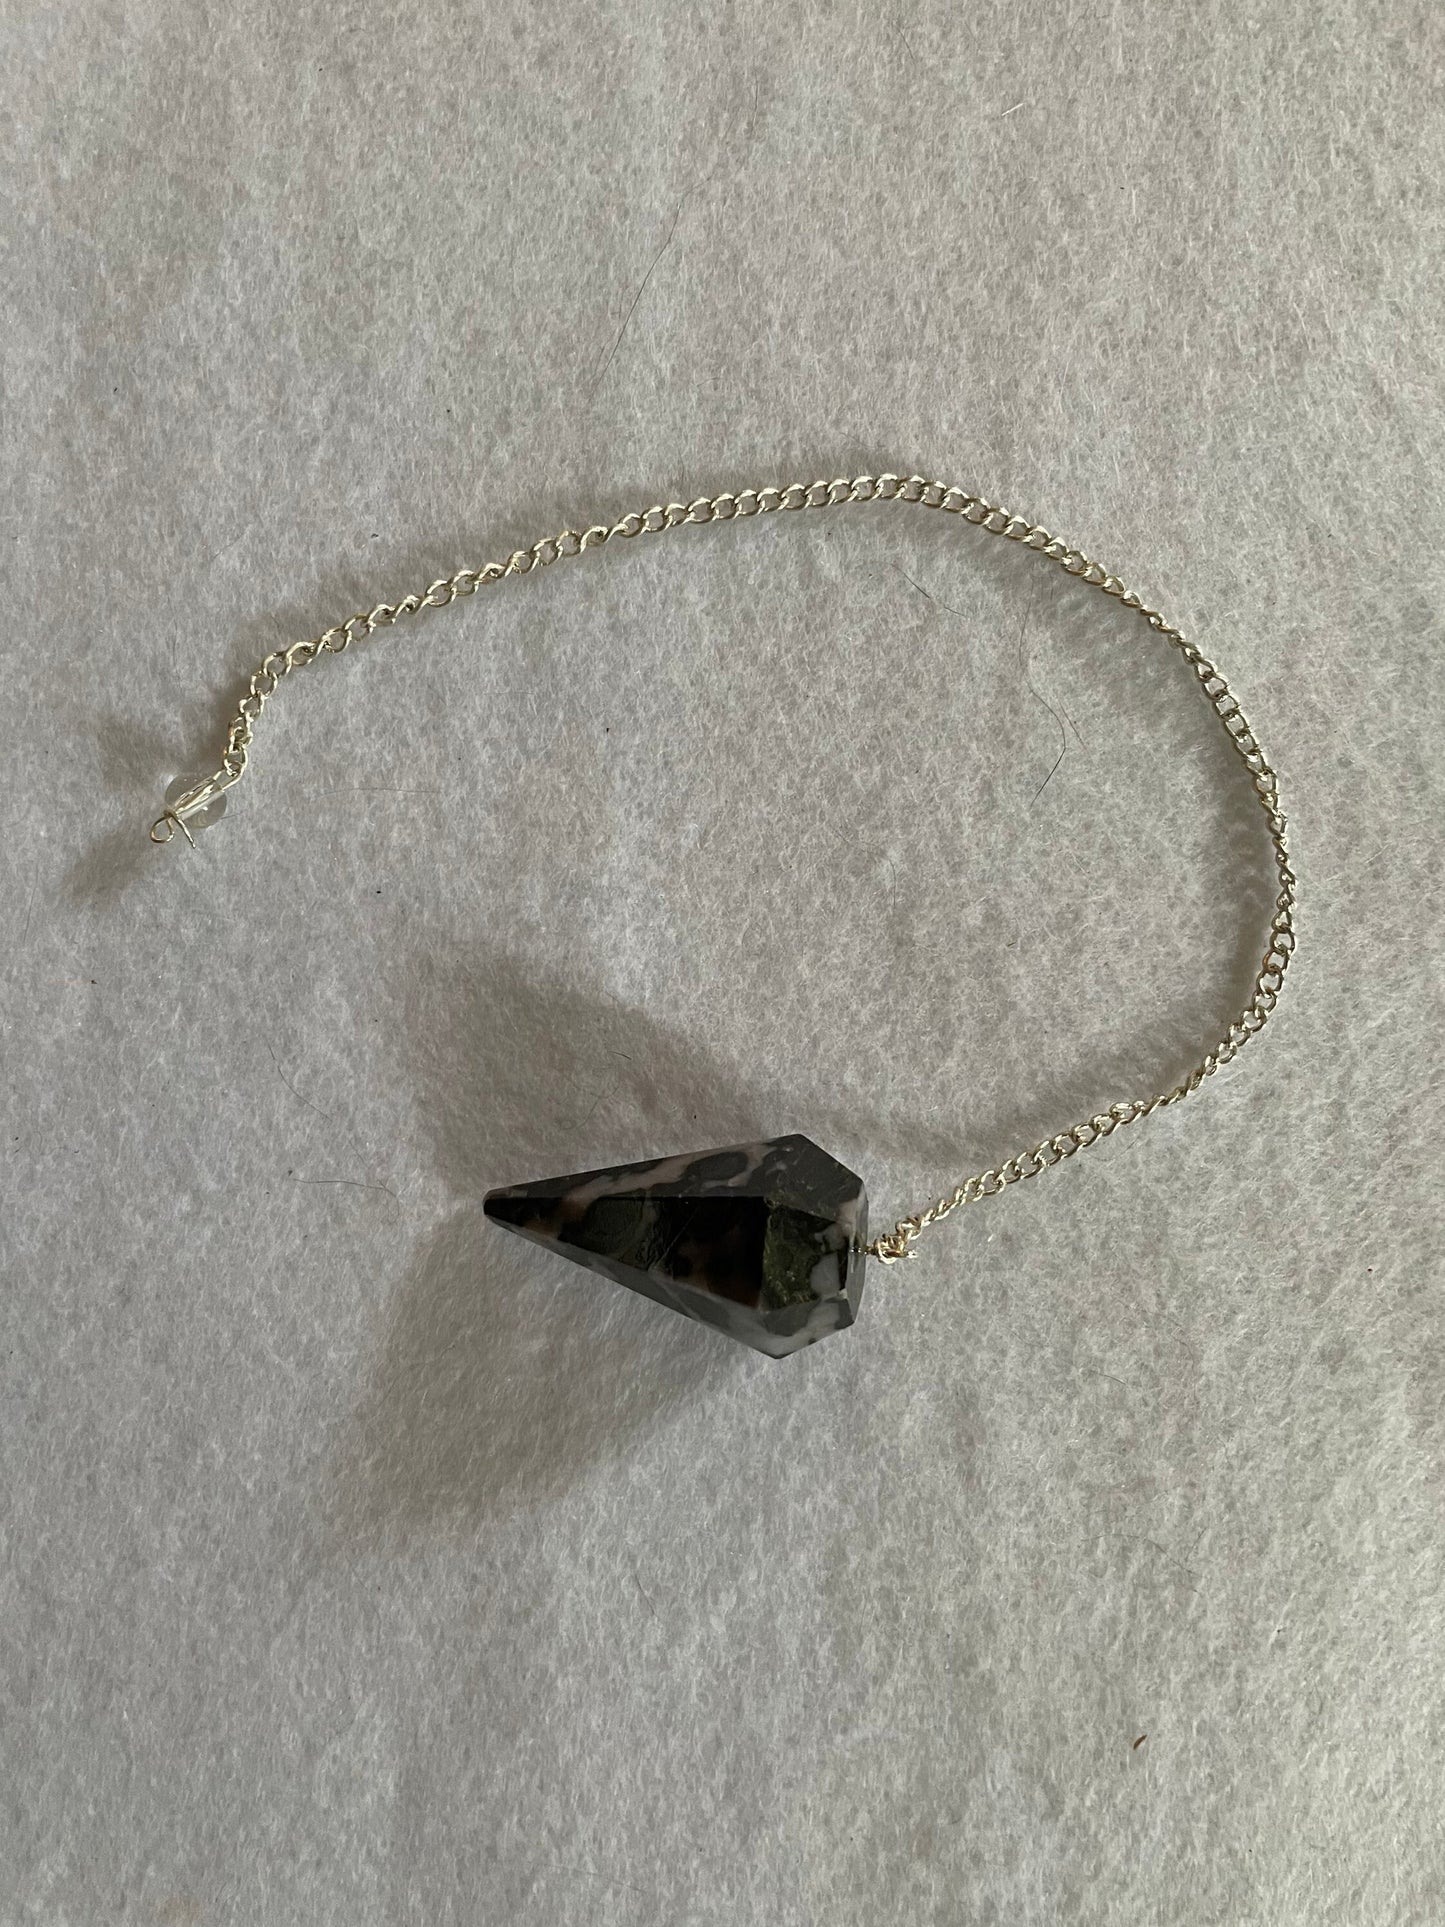 This beautiful Gabbro pendulum is approximately 1.5” and with chain is 9.5” total length.